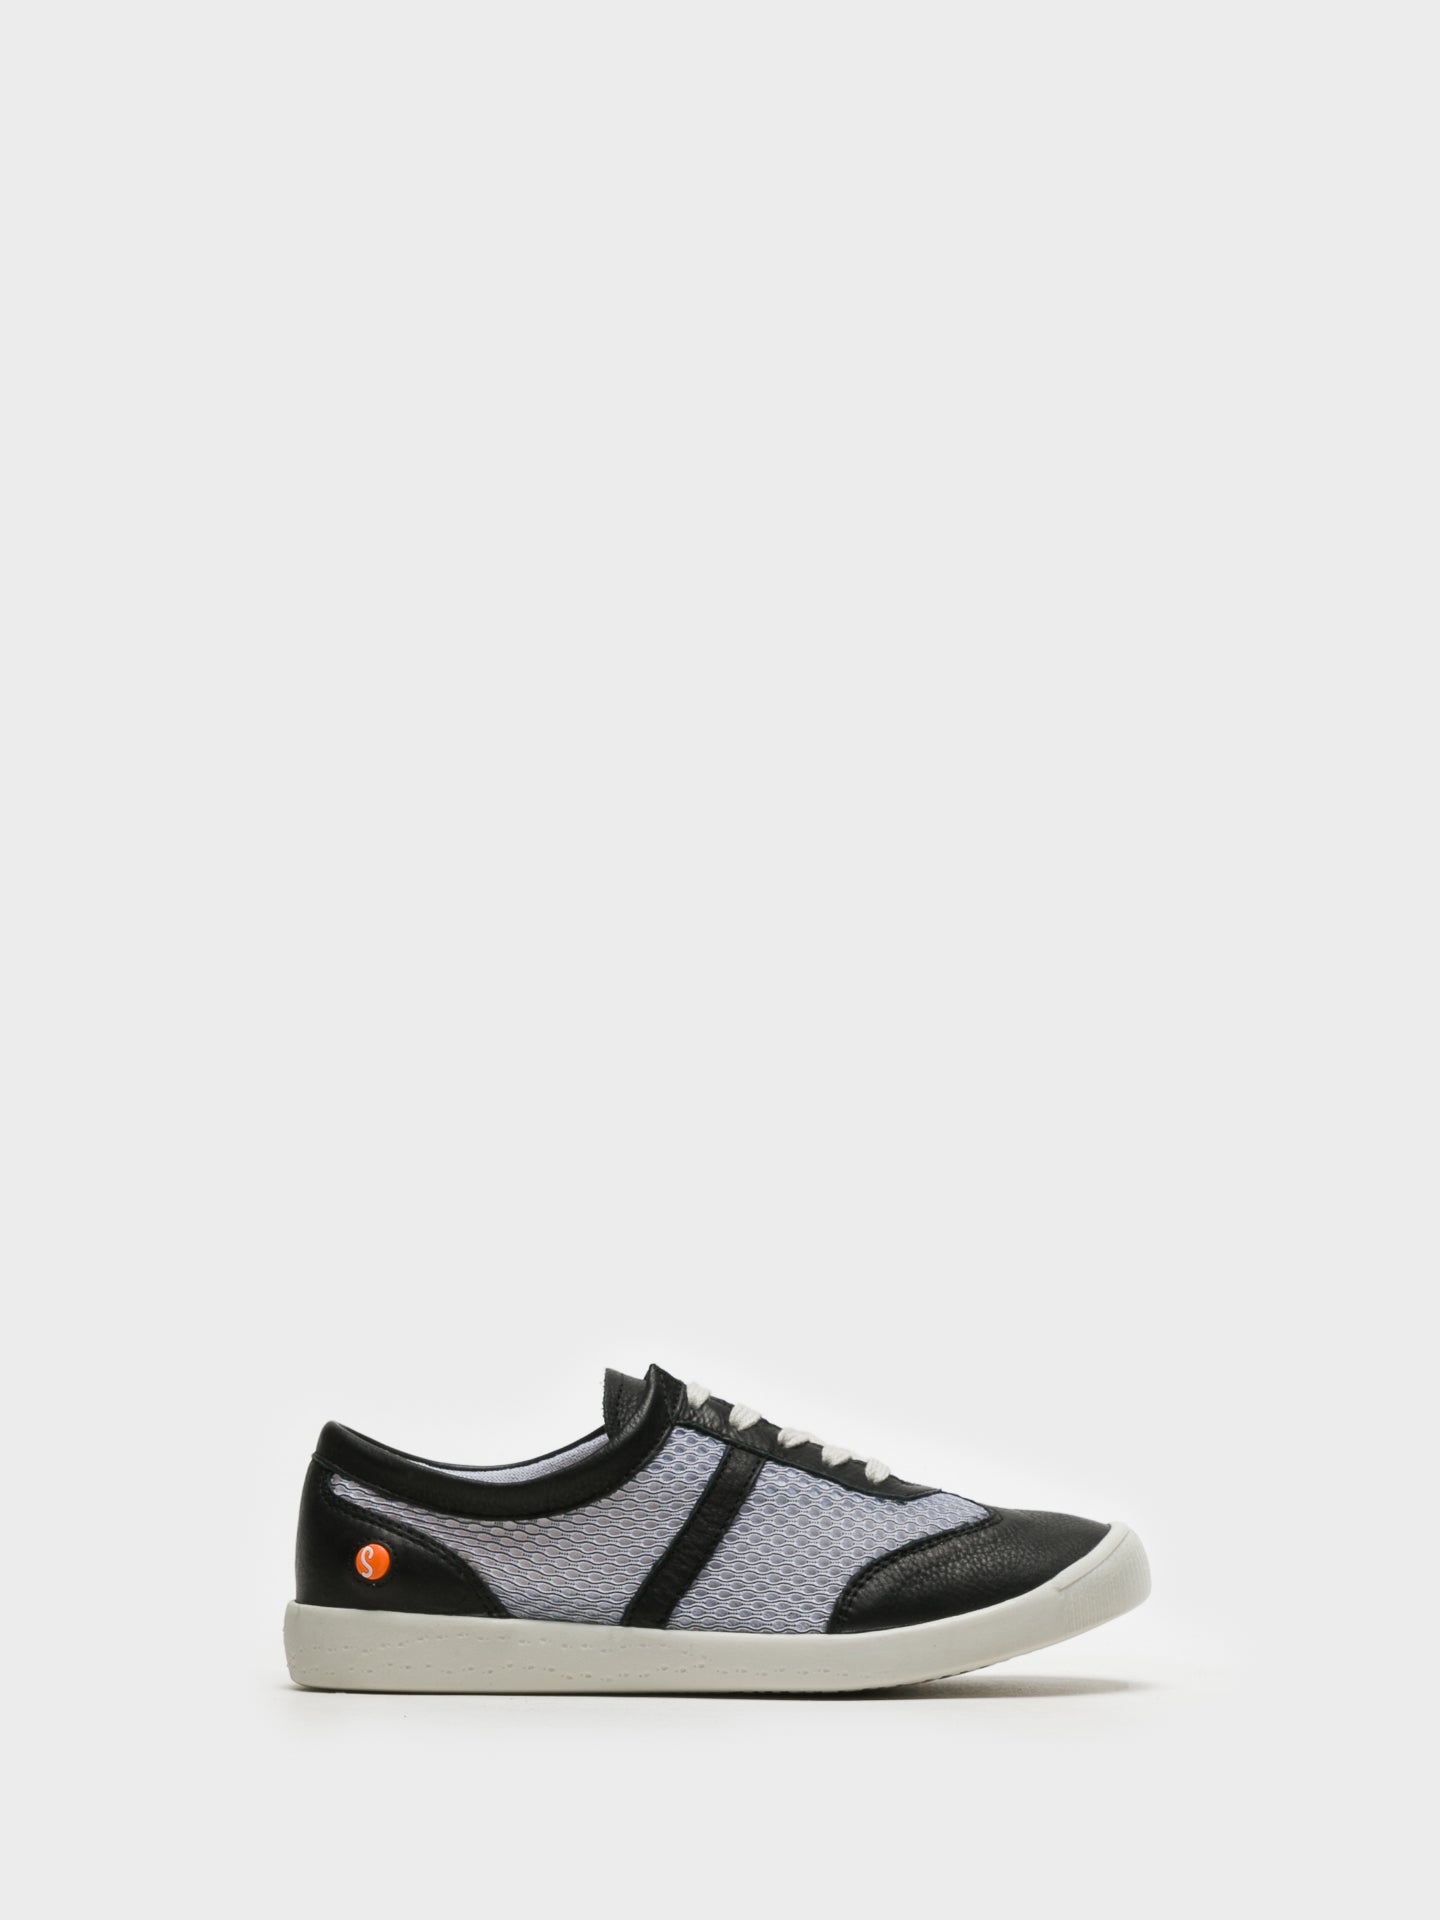 Softinos Black White Lace-up Trainers